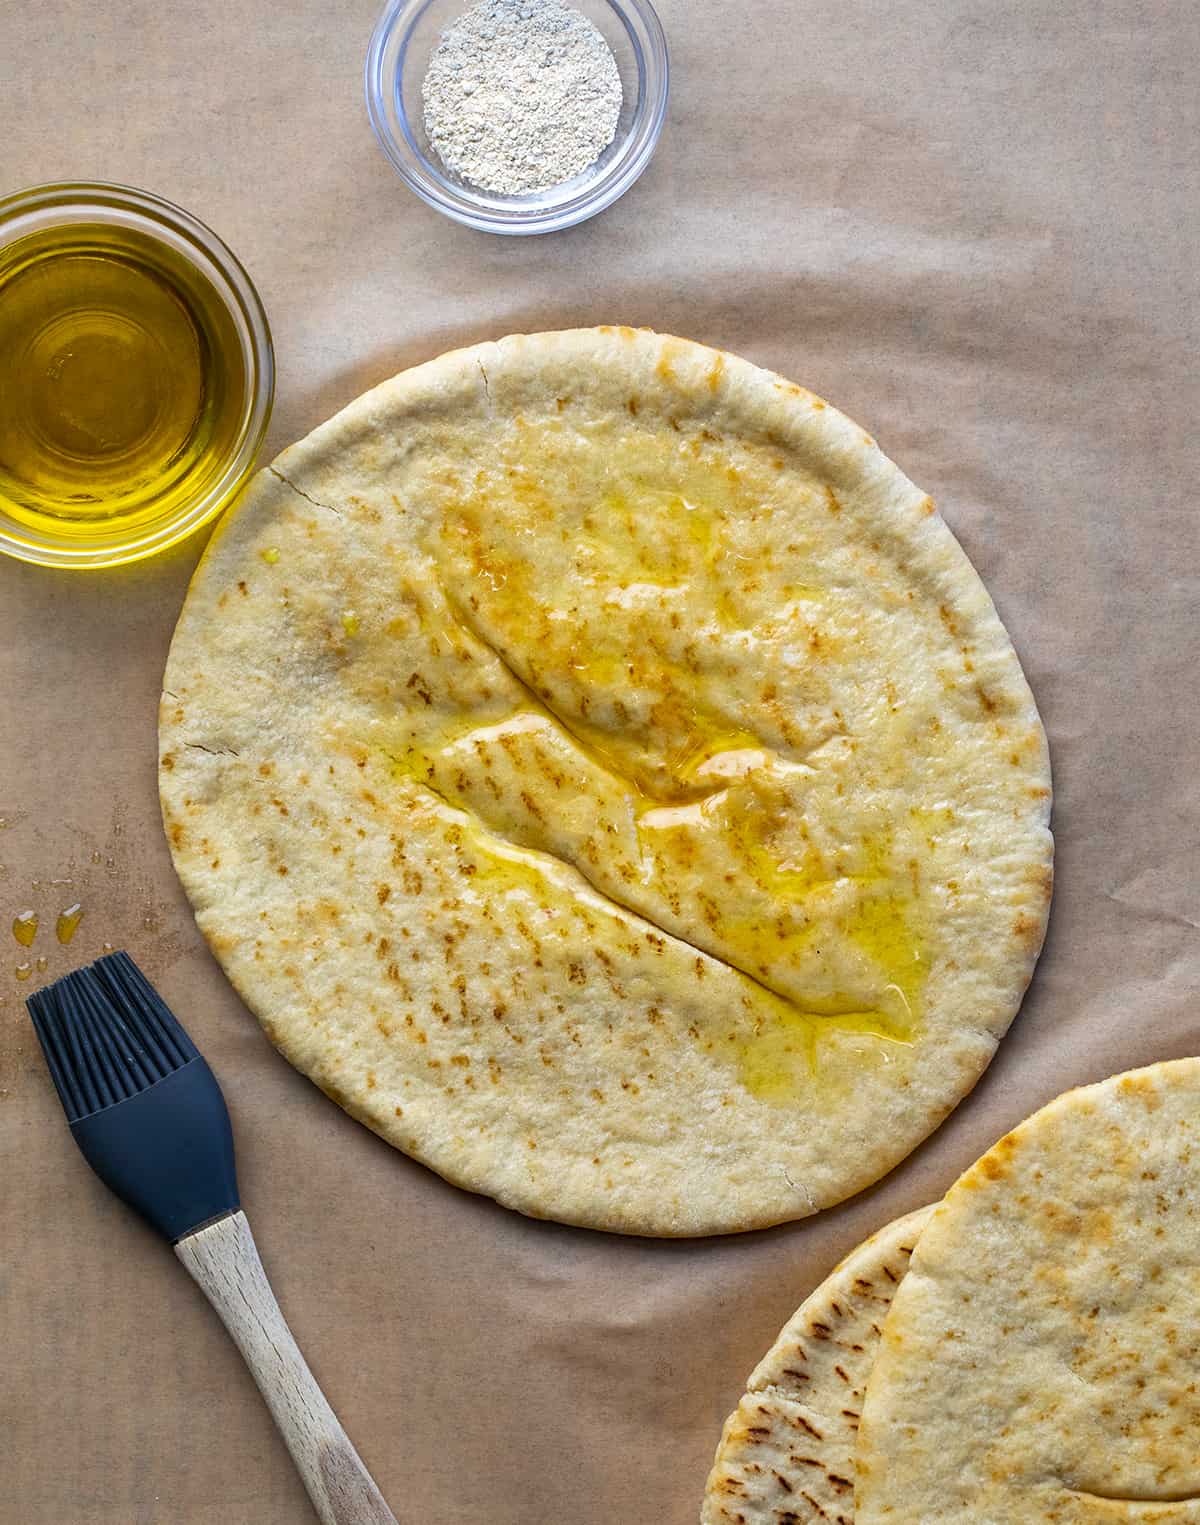 Pita Bread Brushed with Oil Before Making Pita Chips. Pita Chips, How to Make Pita Chips, Air Fryer Pita Chips, Pita Chips in the Oven, Seasoned Pita Chips, Crispy Pita Chips, recipes, Appetizers, i am homesteader, iamhomesteader